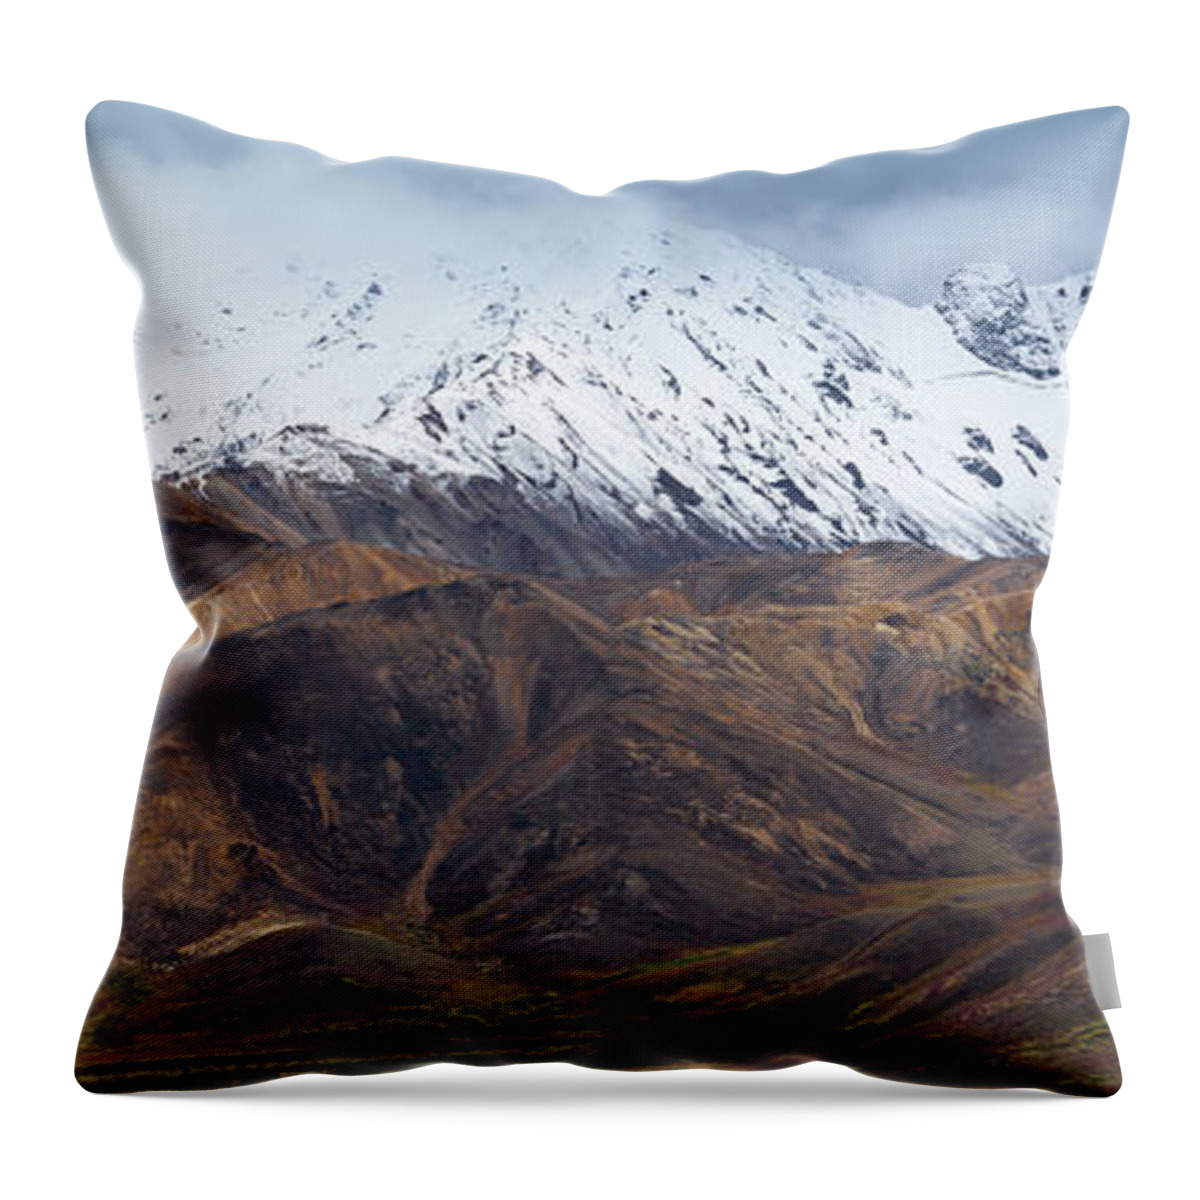 Polychrome Throw Pillow featuring the photograph Polychrome Mountains II by Scott Slone